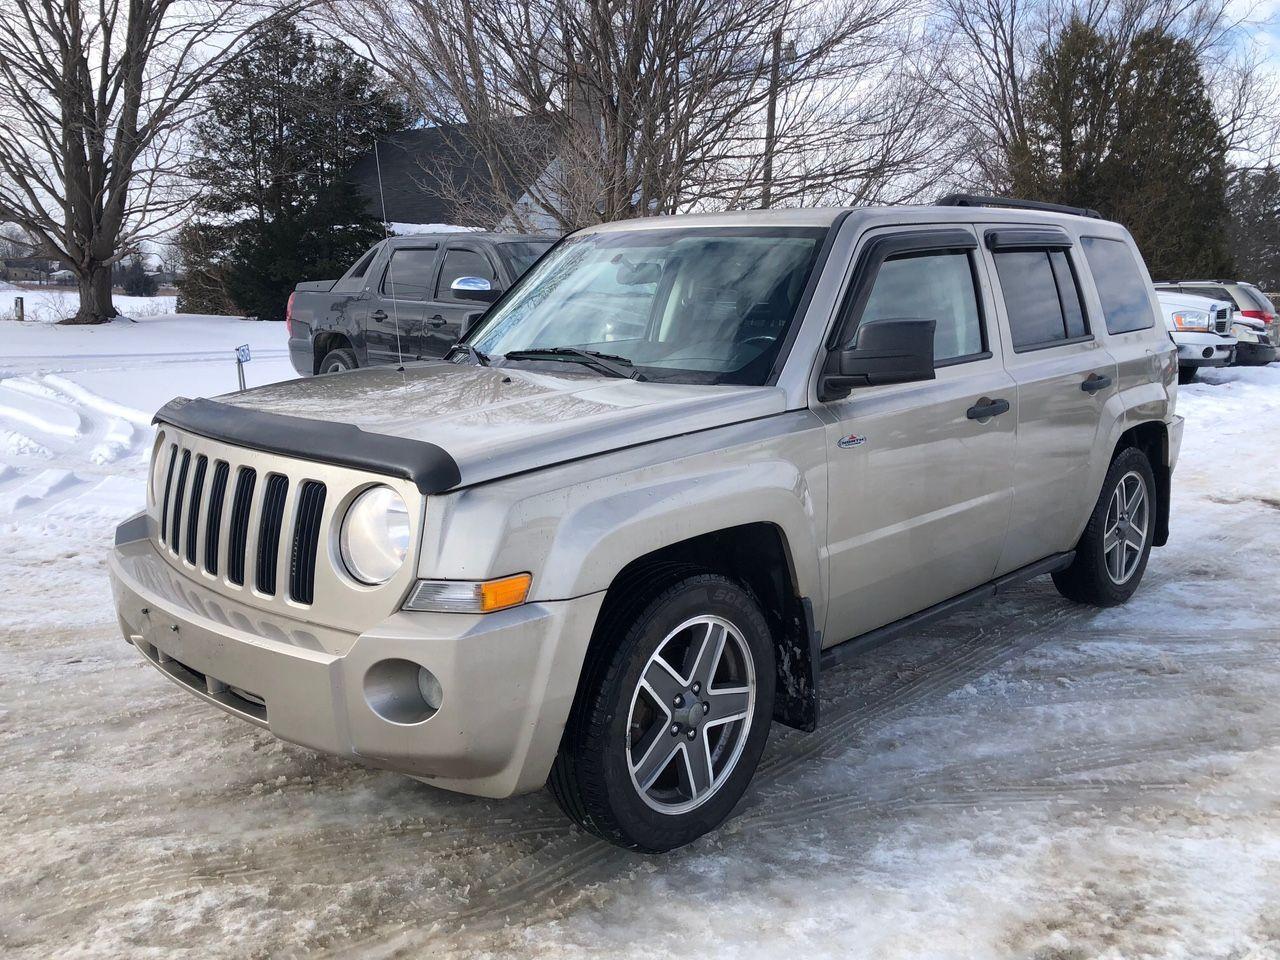 2009 Jeep Patriot NORTH*GREAT CONDITION*4X4*2.4L*AS IS SPECIAL - Photo #1